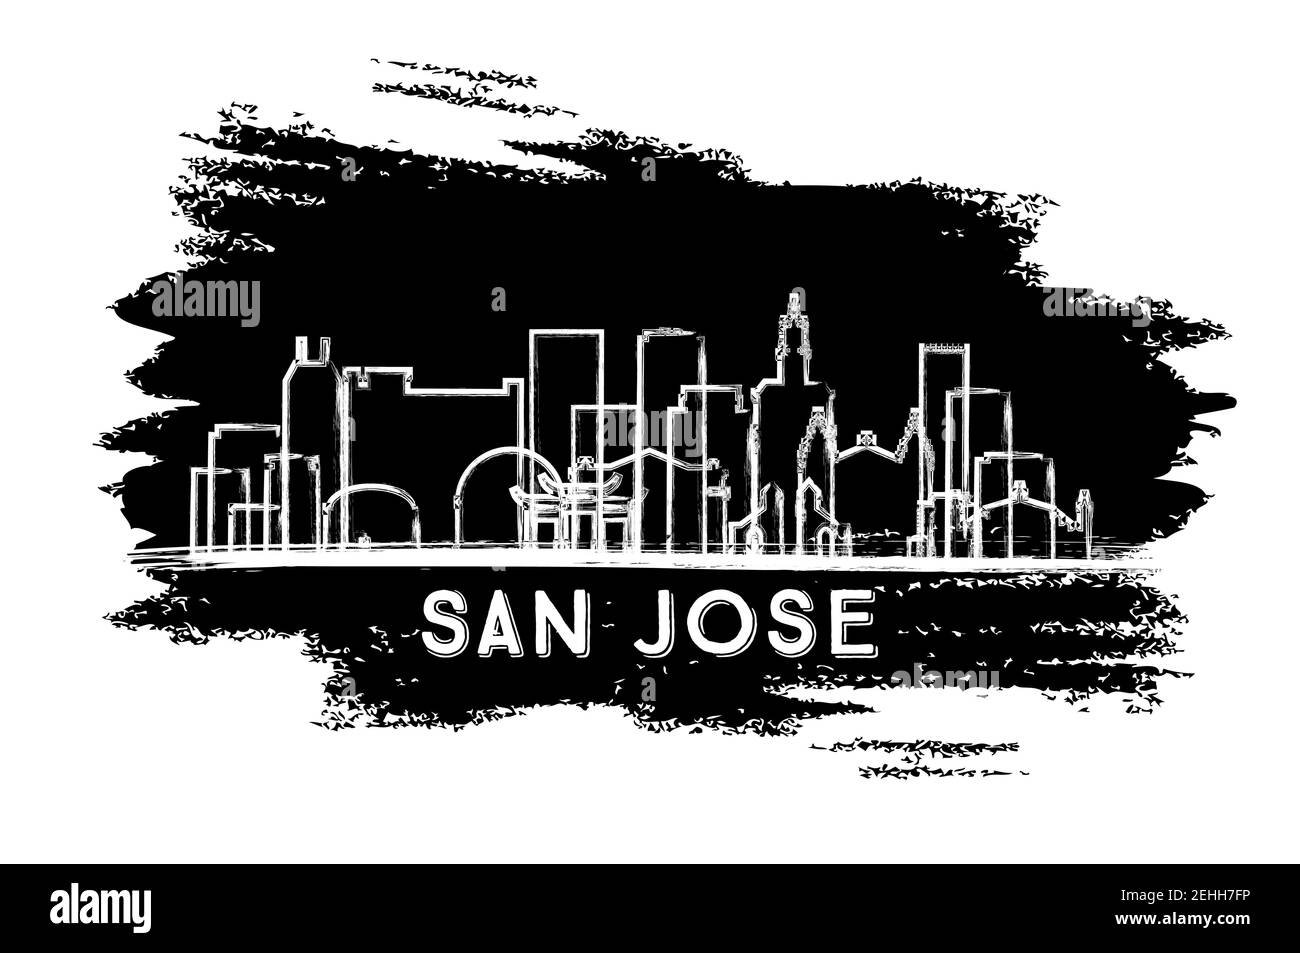 San Jose California USA City Skyline Silhouette. Hand Drawn Sketch. Business Travel and Tourism Concept with Modern Architecture. Vector Illustration. Stock Vector